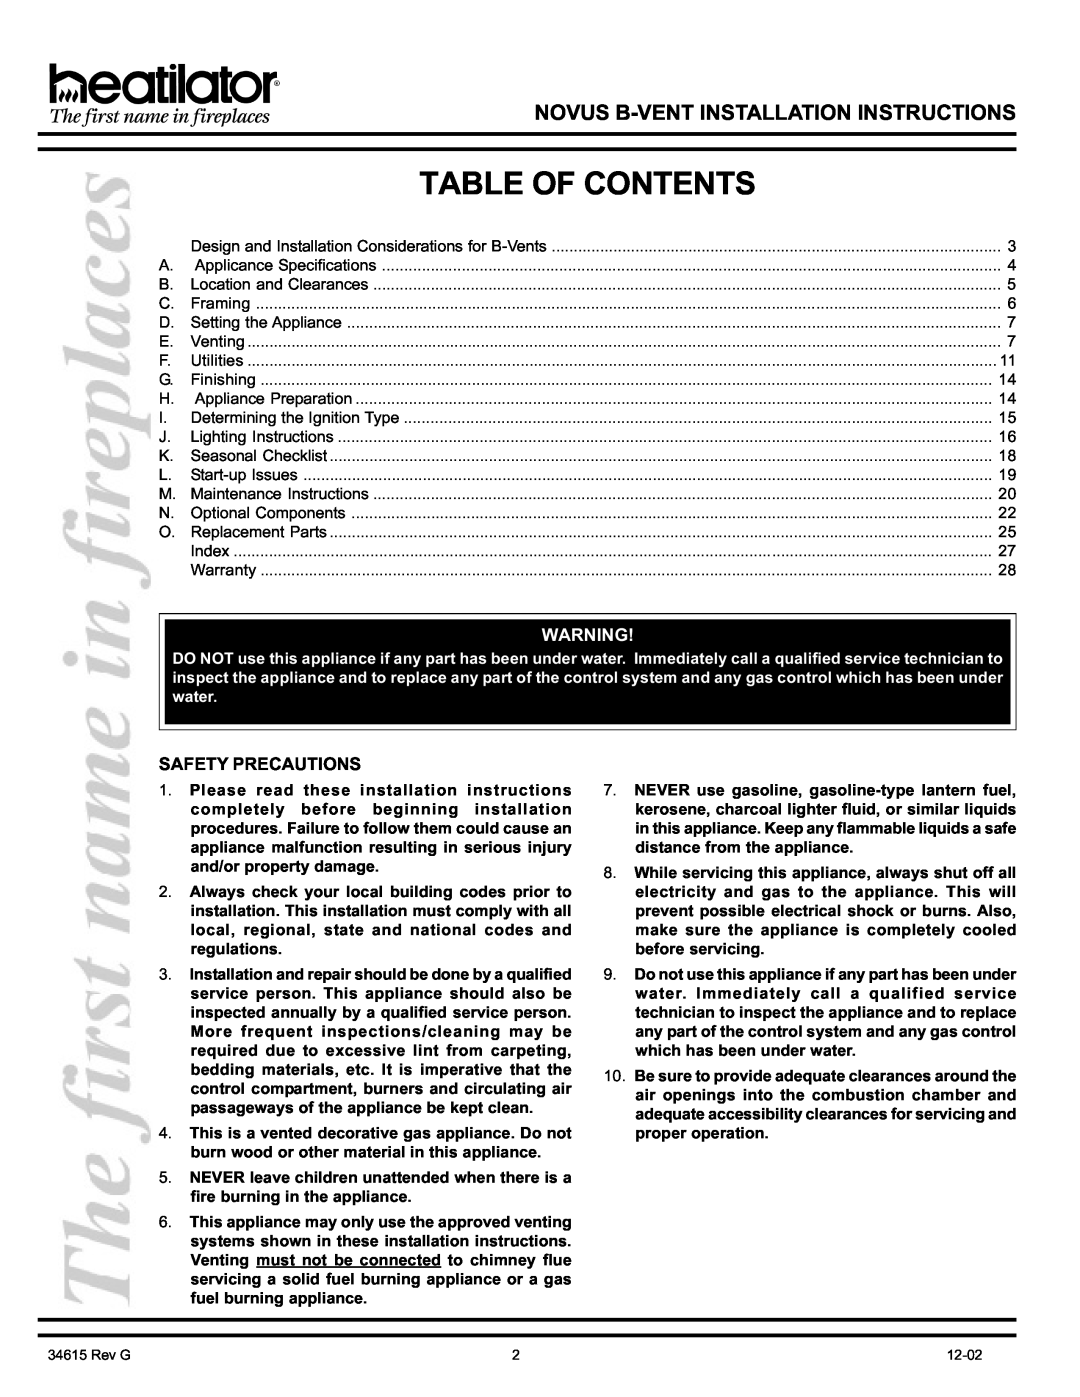 Hearth and Home Technologies GNBC33, GNBC30 Table Of Contents, Novus B-Ventinstallation Instructions, Safety Precautions 